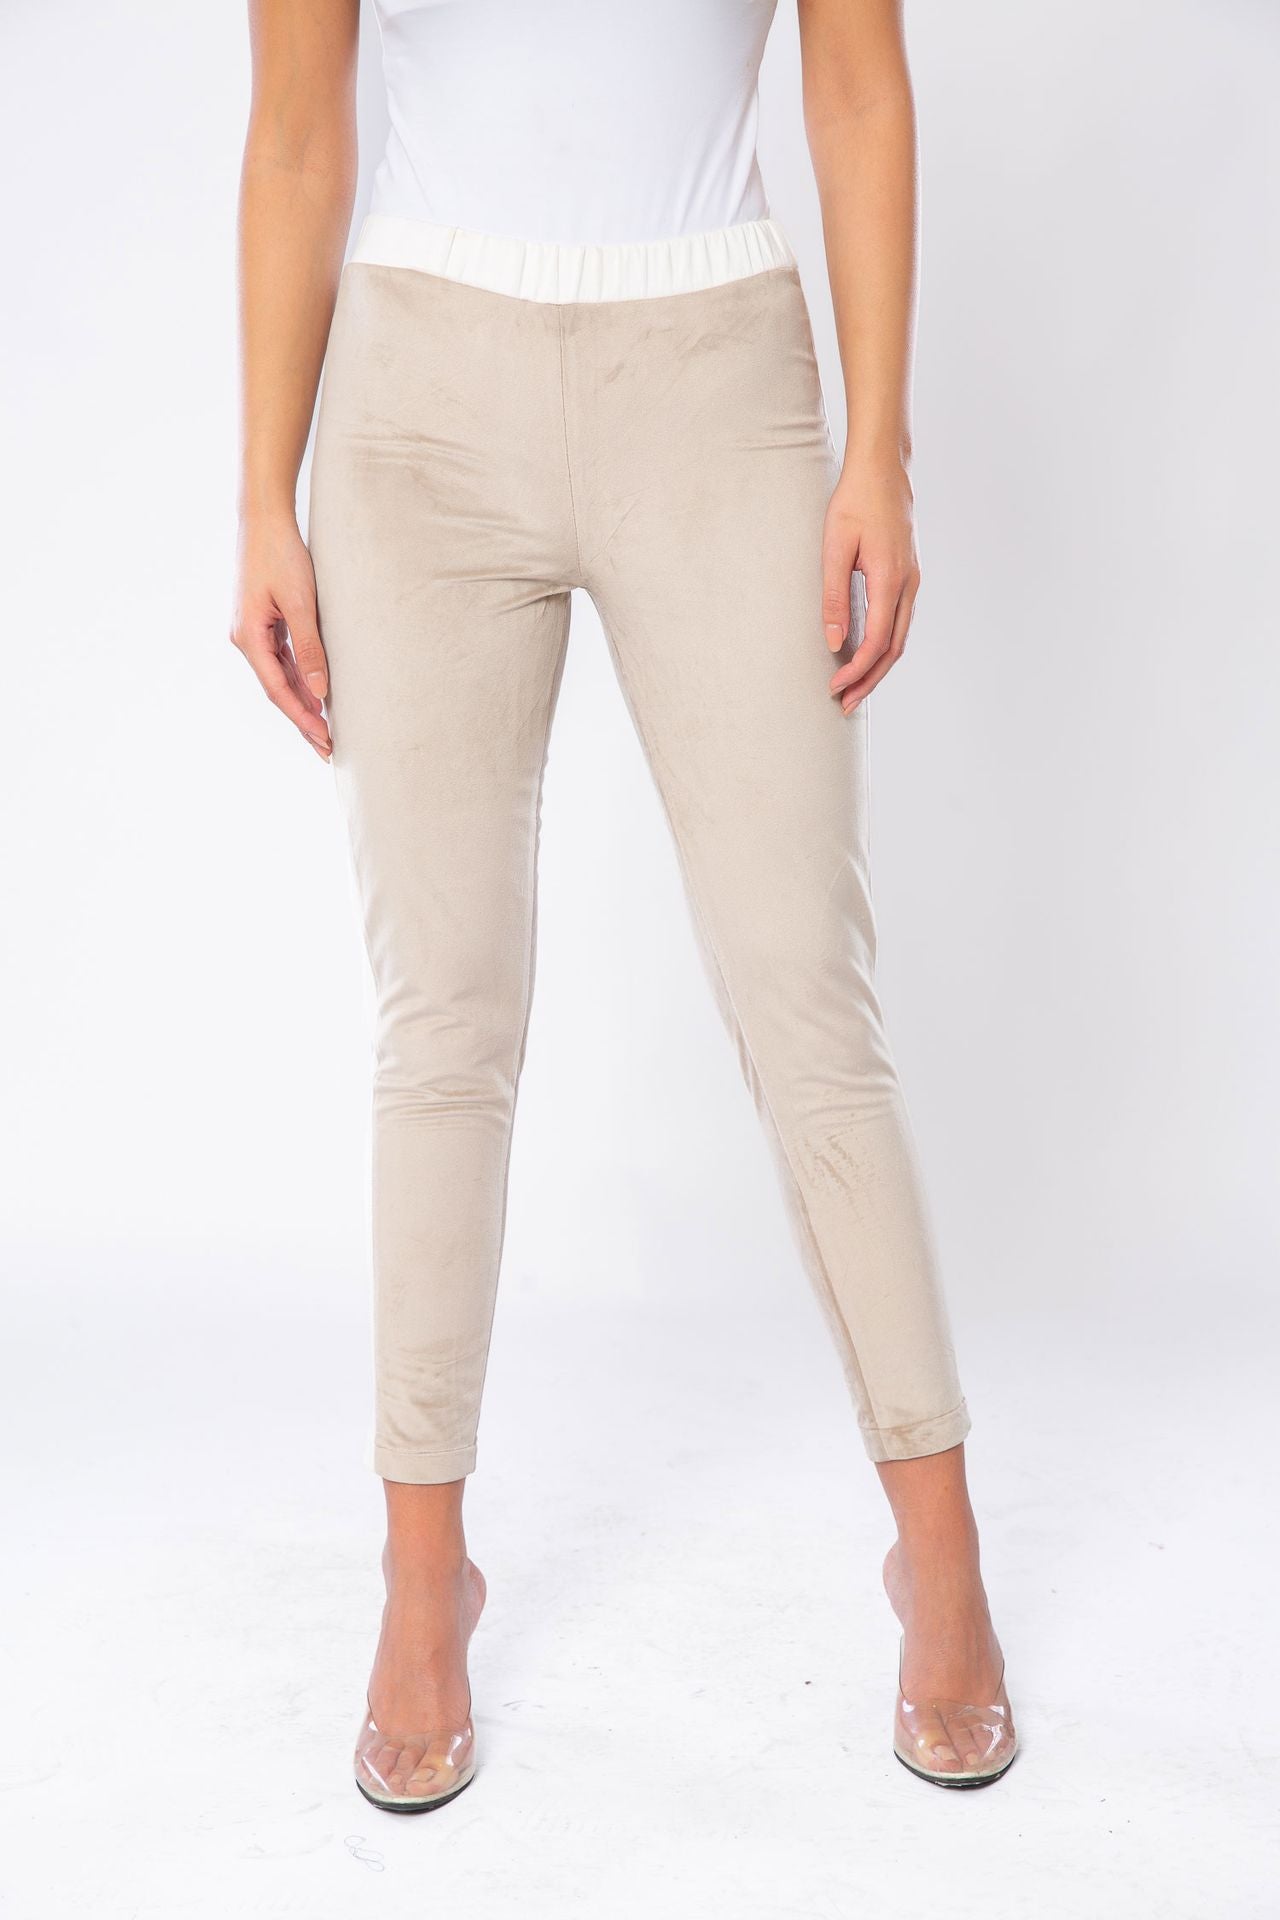 Suede Pant with White Sideline